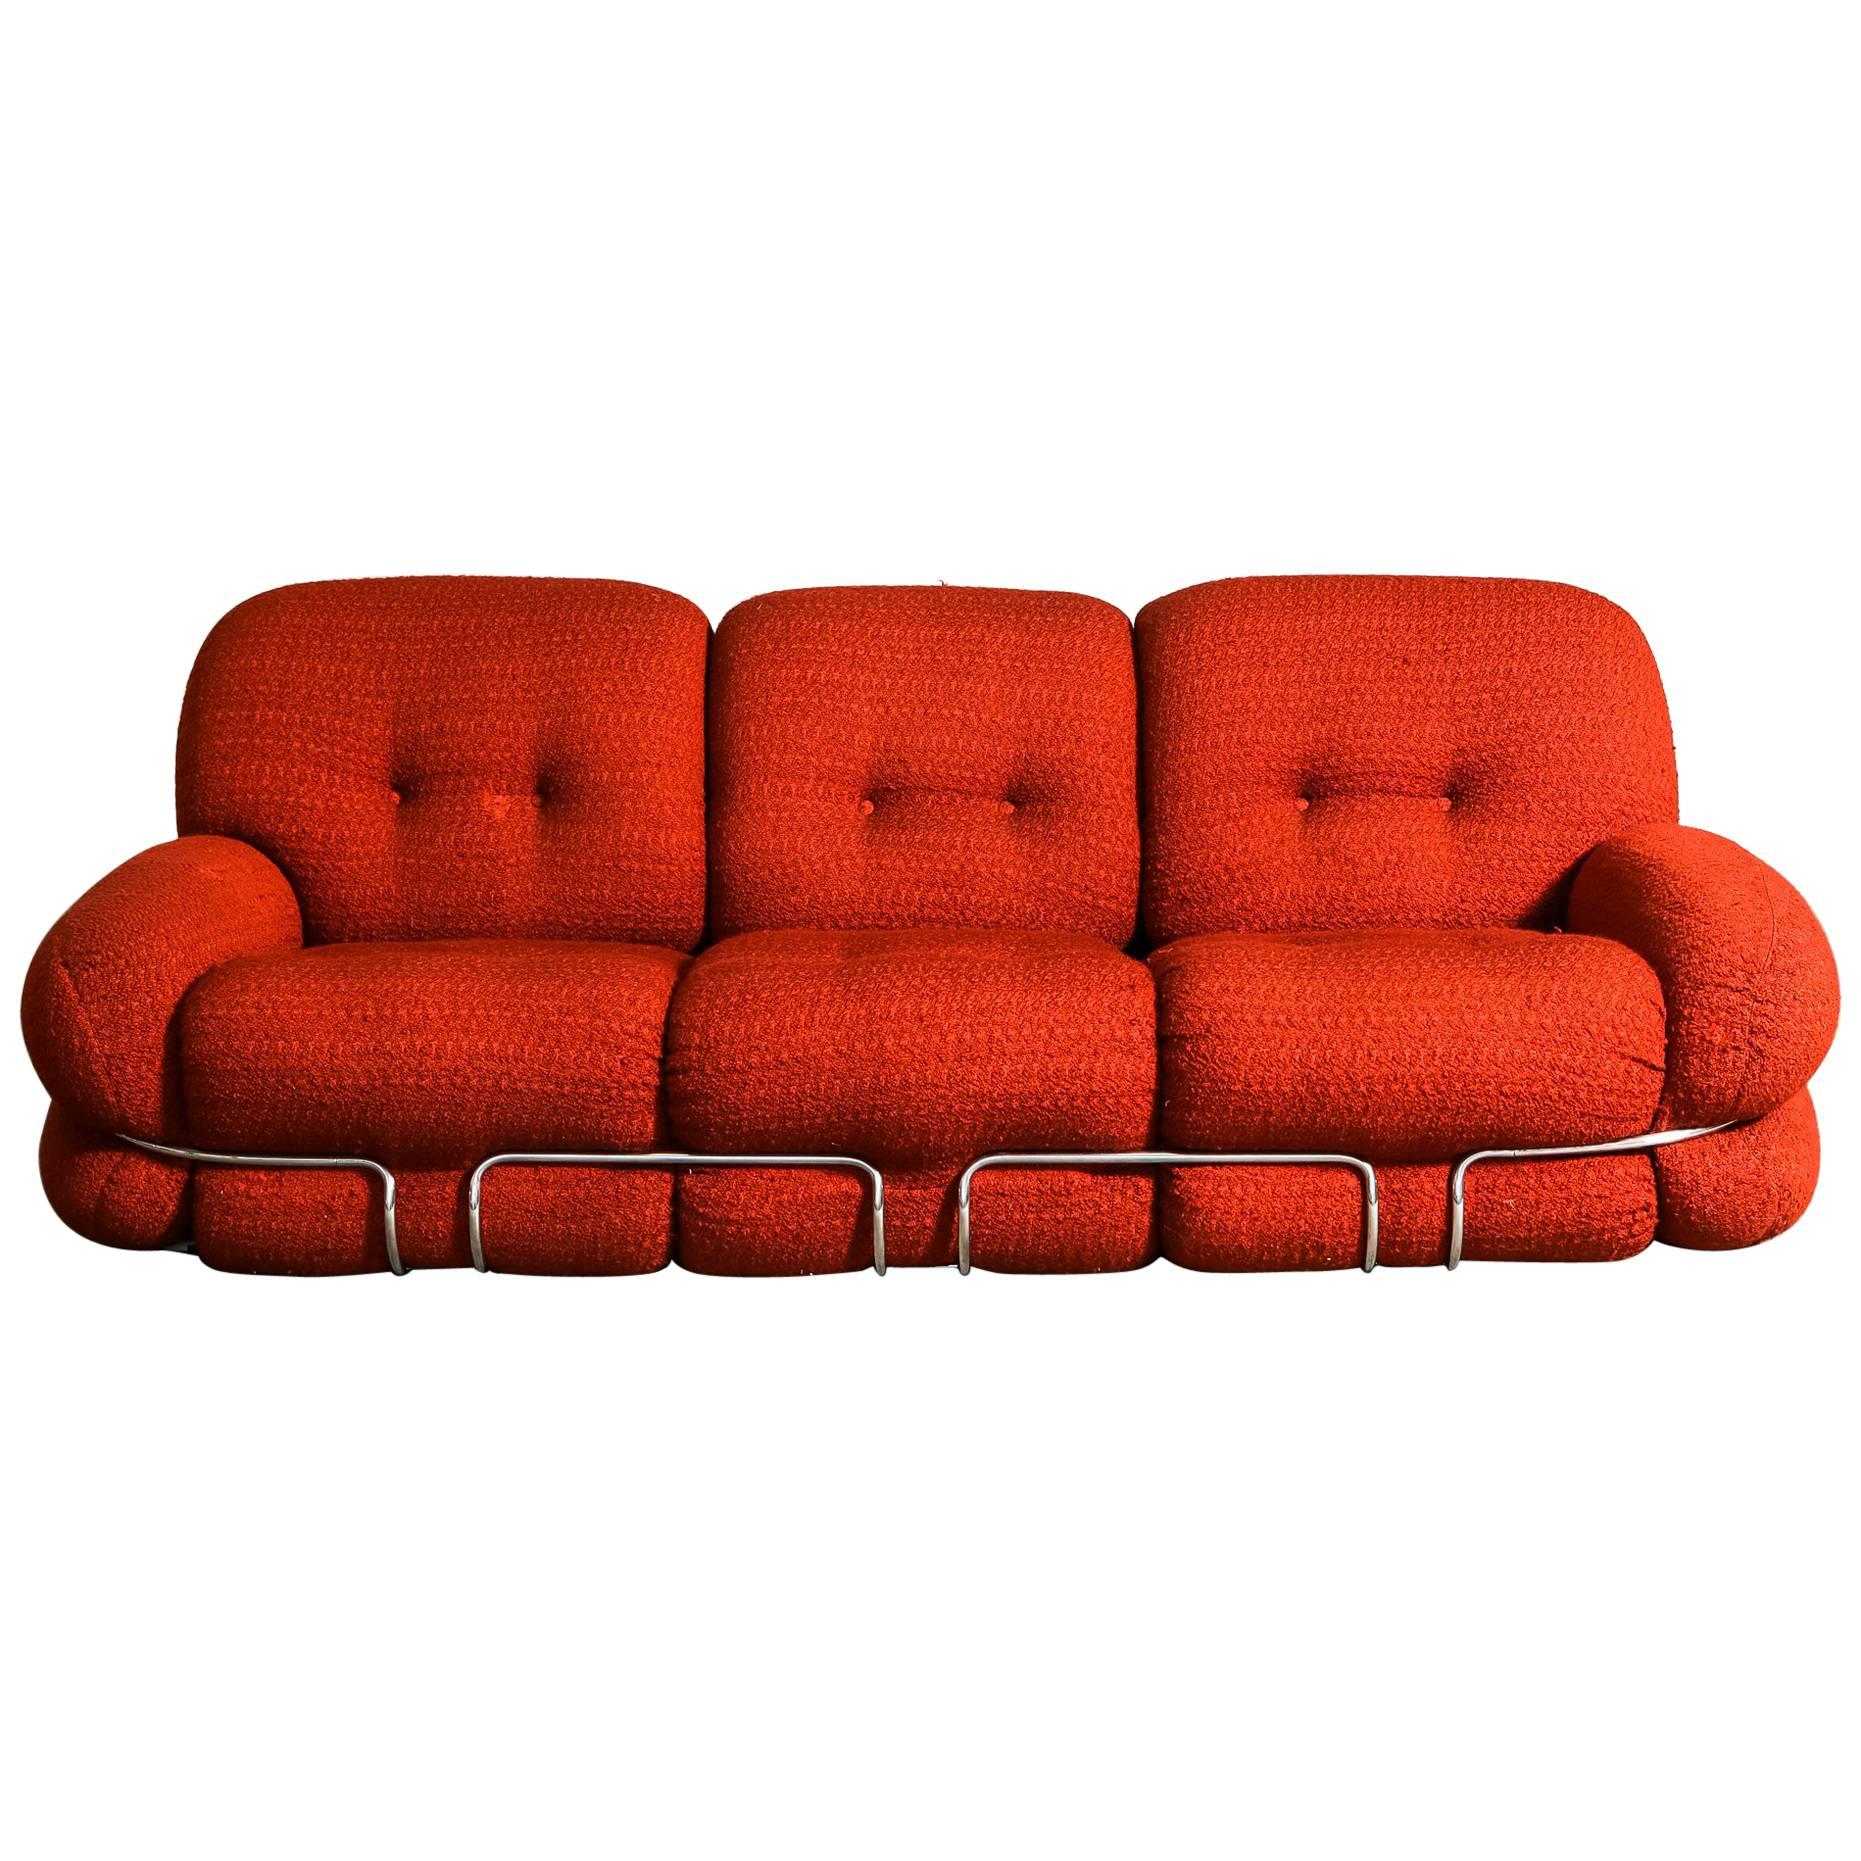 Midcentury Red Wool Blend Sofa by Adriano Piazzesi, circa 1970